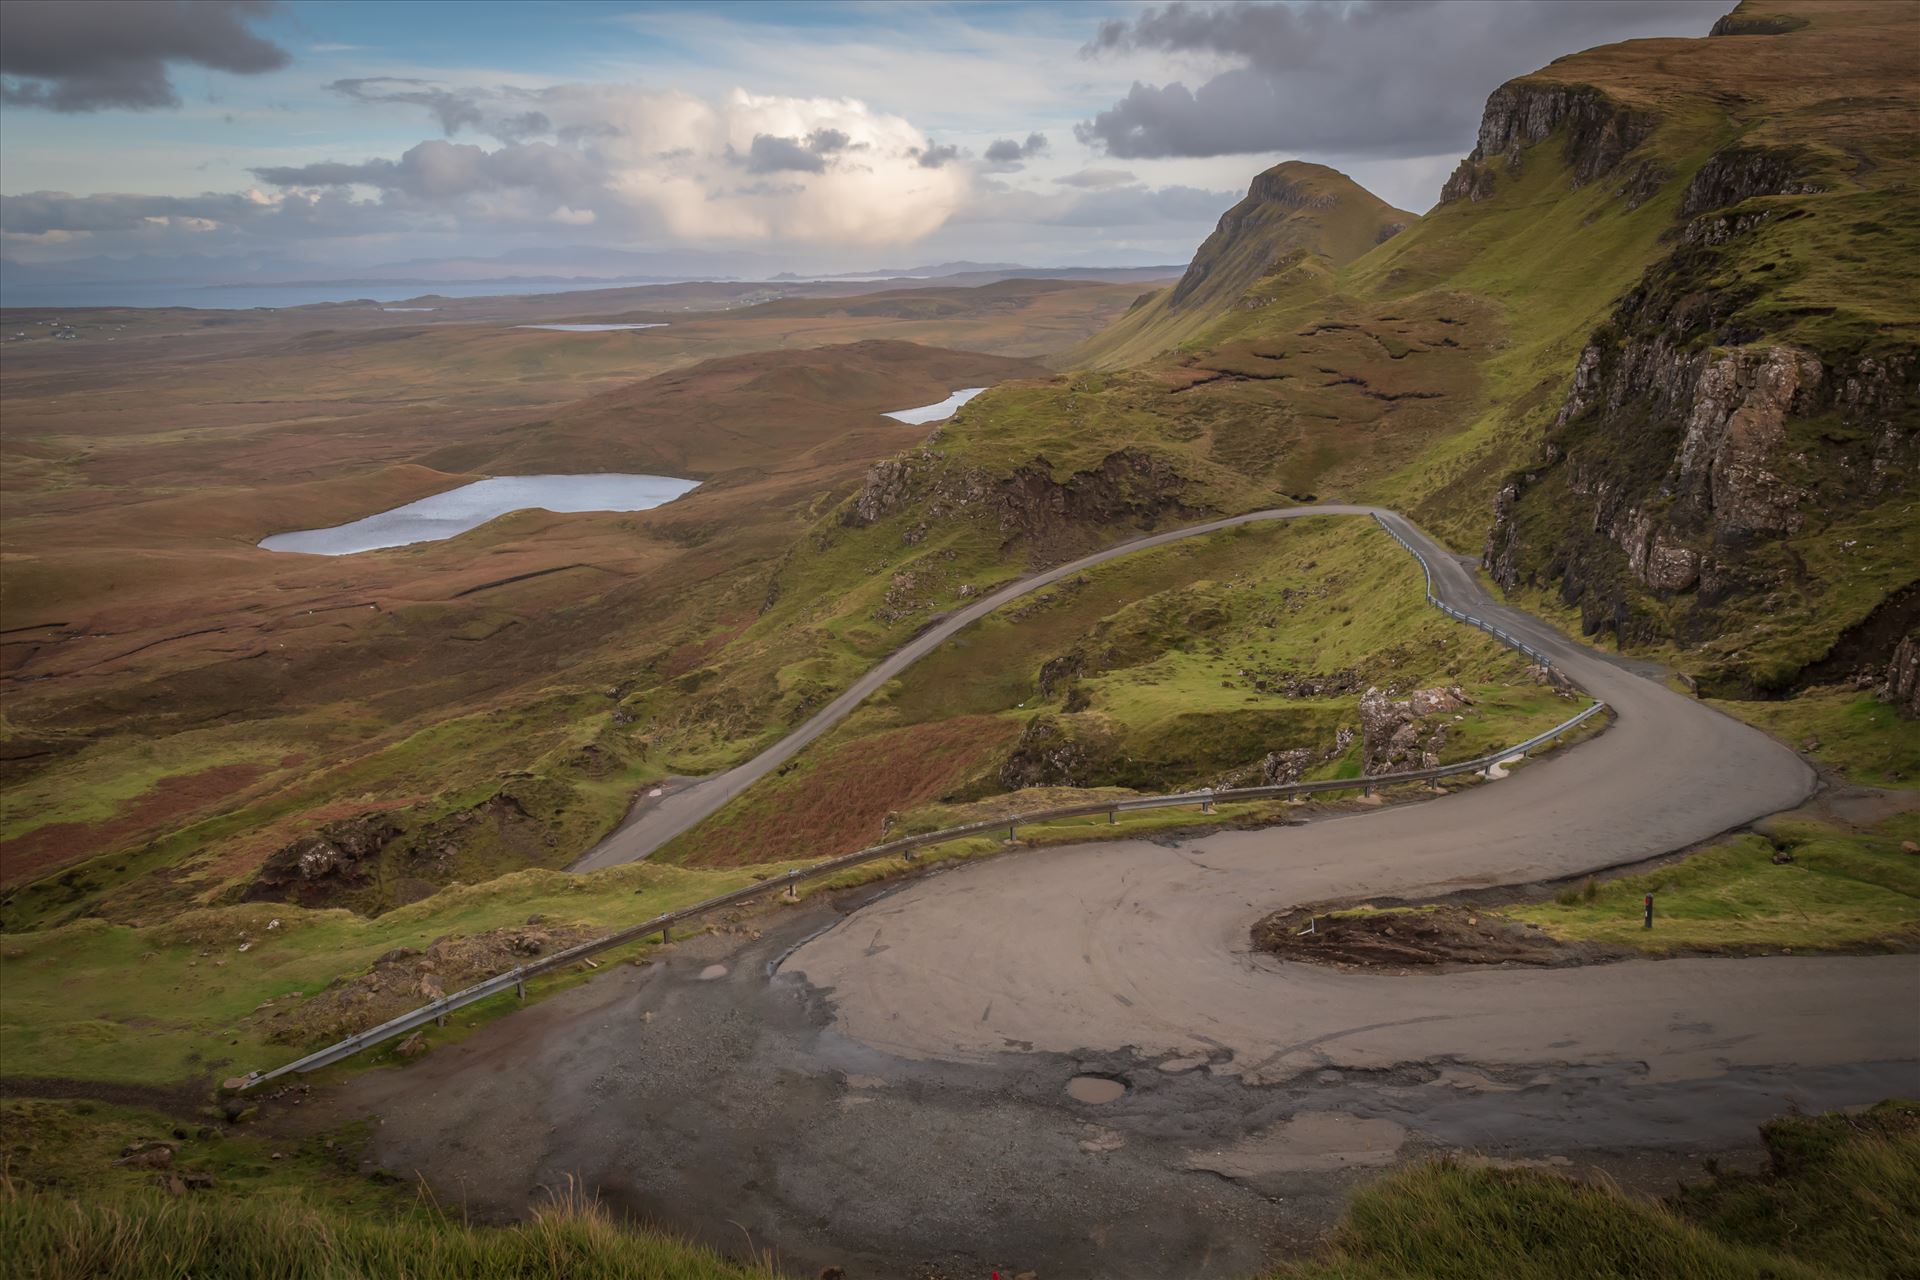 The Quiraing (4) The Quiraing is a landslip on the northernmost summit of the Trotternish on the Isle of Skye. The whole of the Trotternish Ridge escarpment was formed by a great series of landslips, the Quiraing is the only part of the slip still moving. by philreay